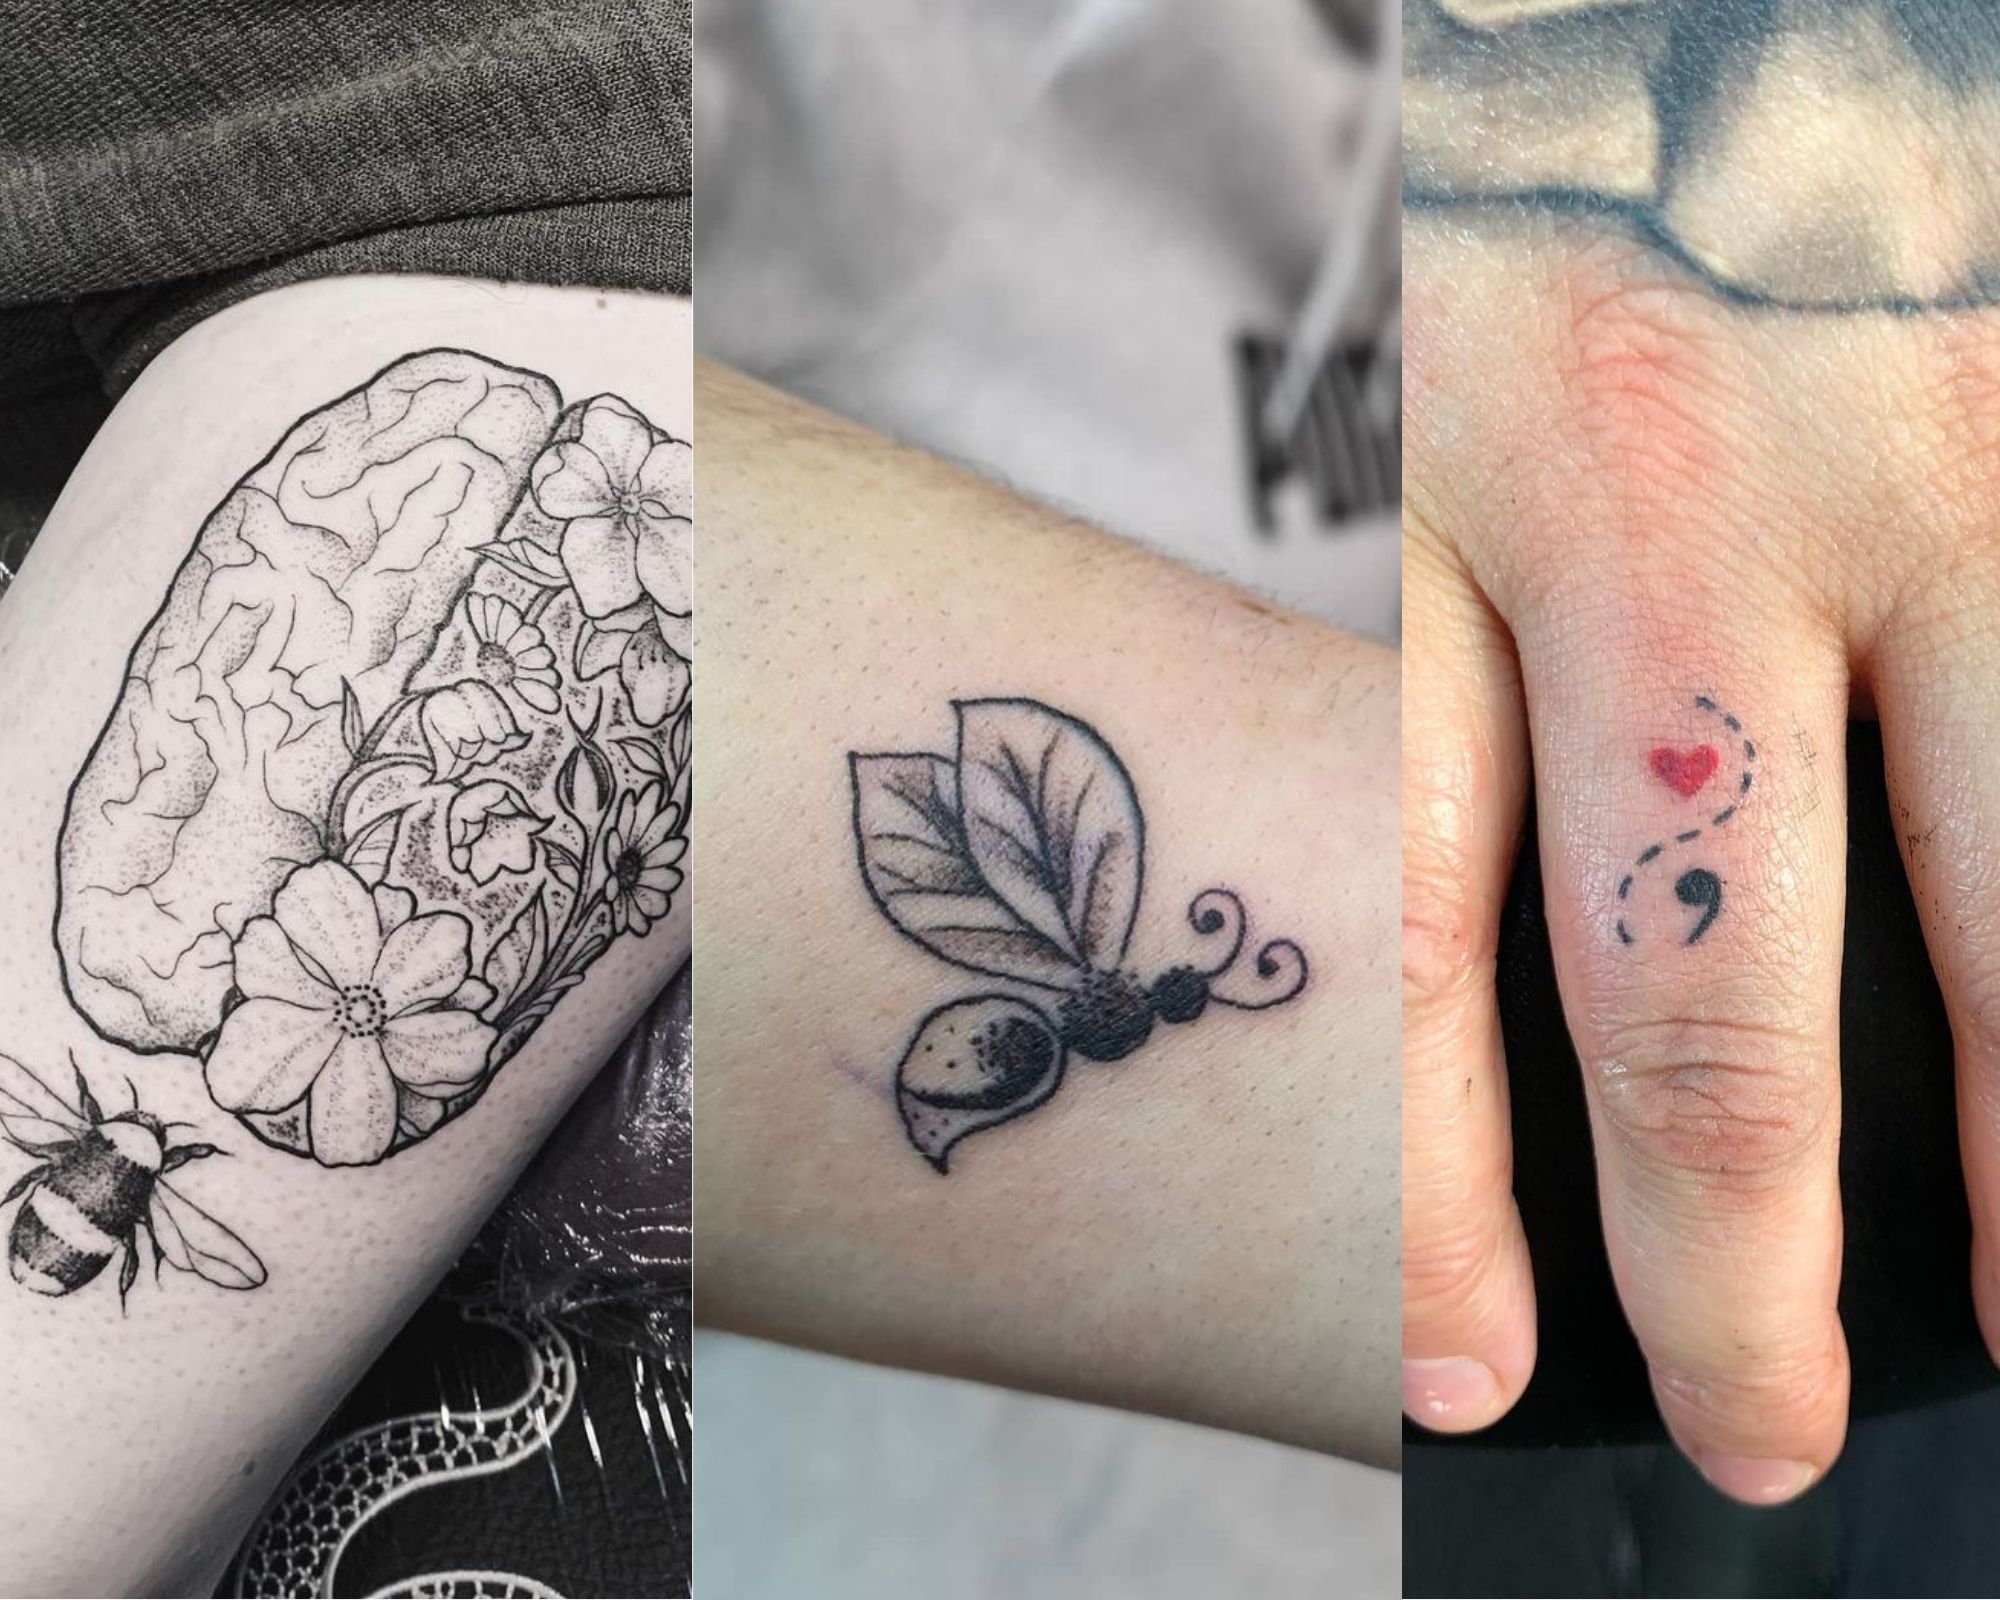 20 inspiring mental health tattoos ideas to try and their significance - YEN.COM.GH